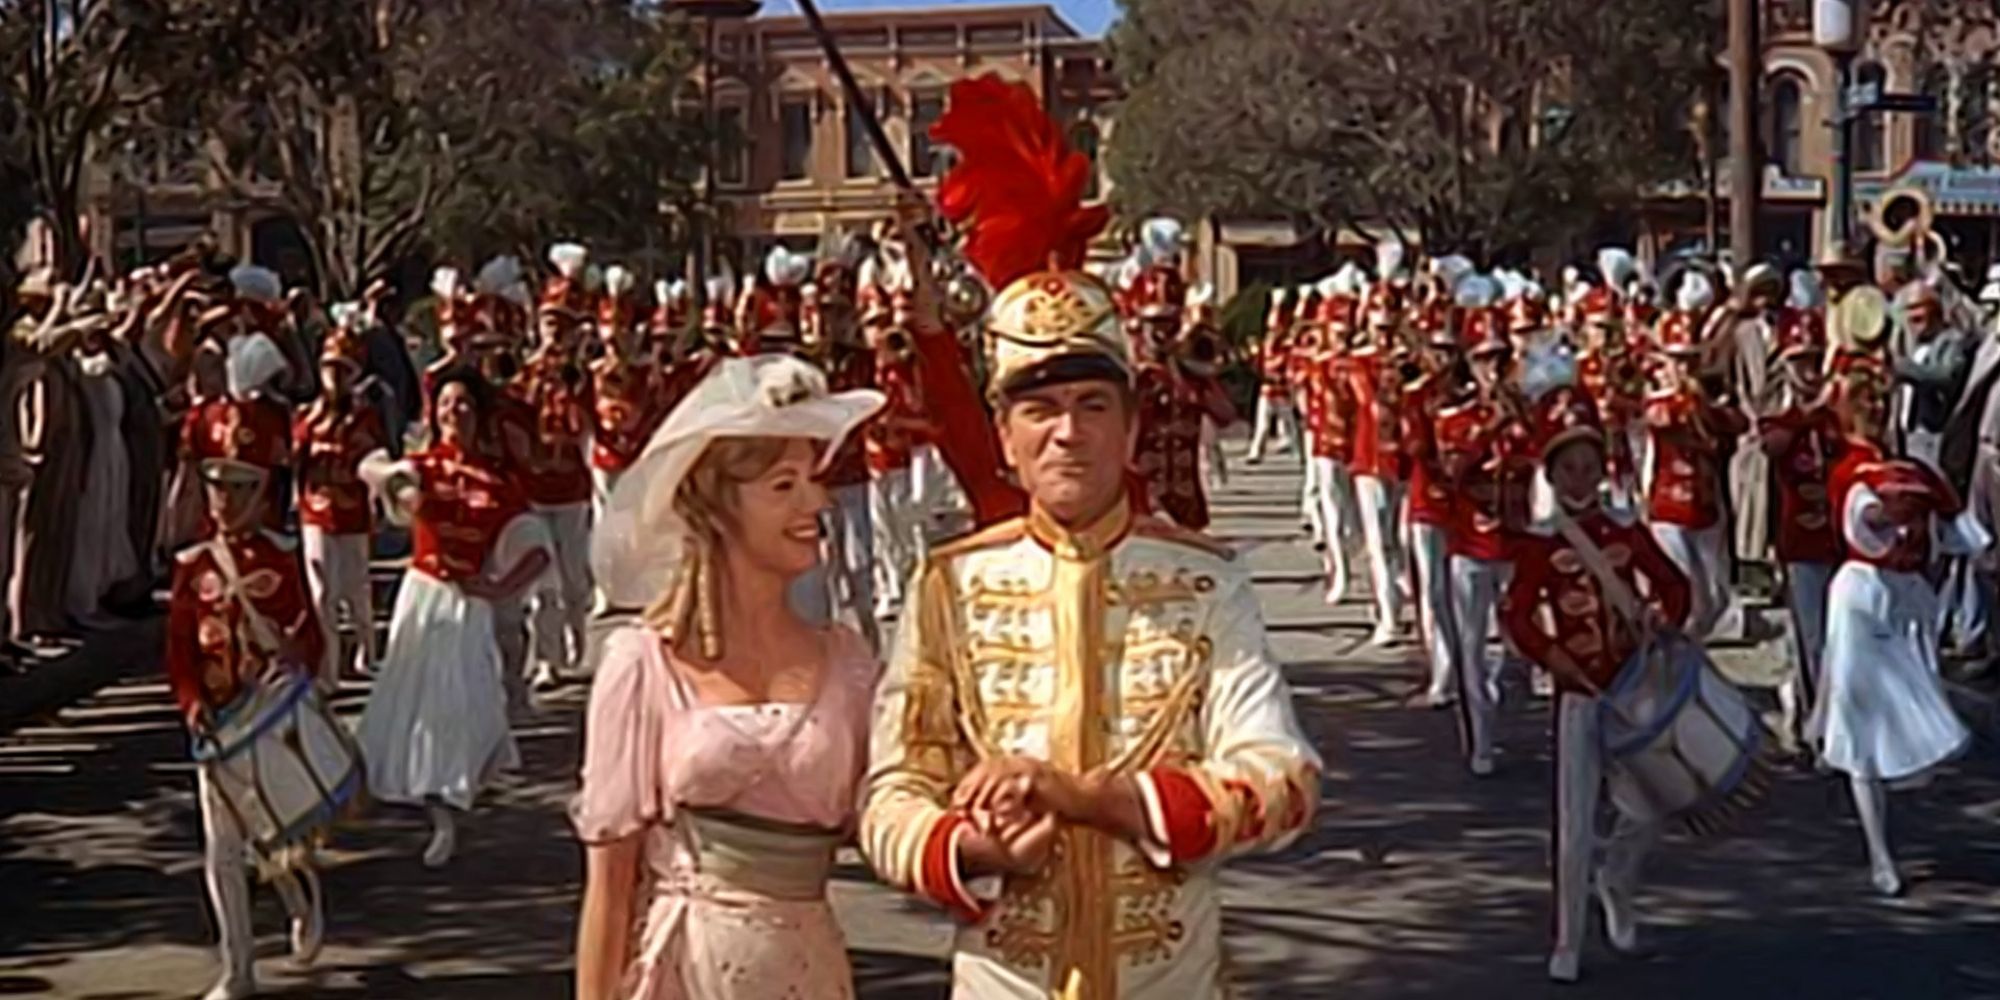 A musical performance involving a marching band from "The Music Man"